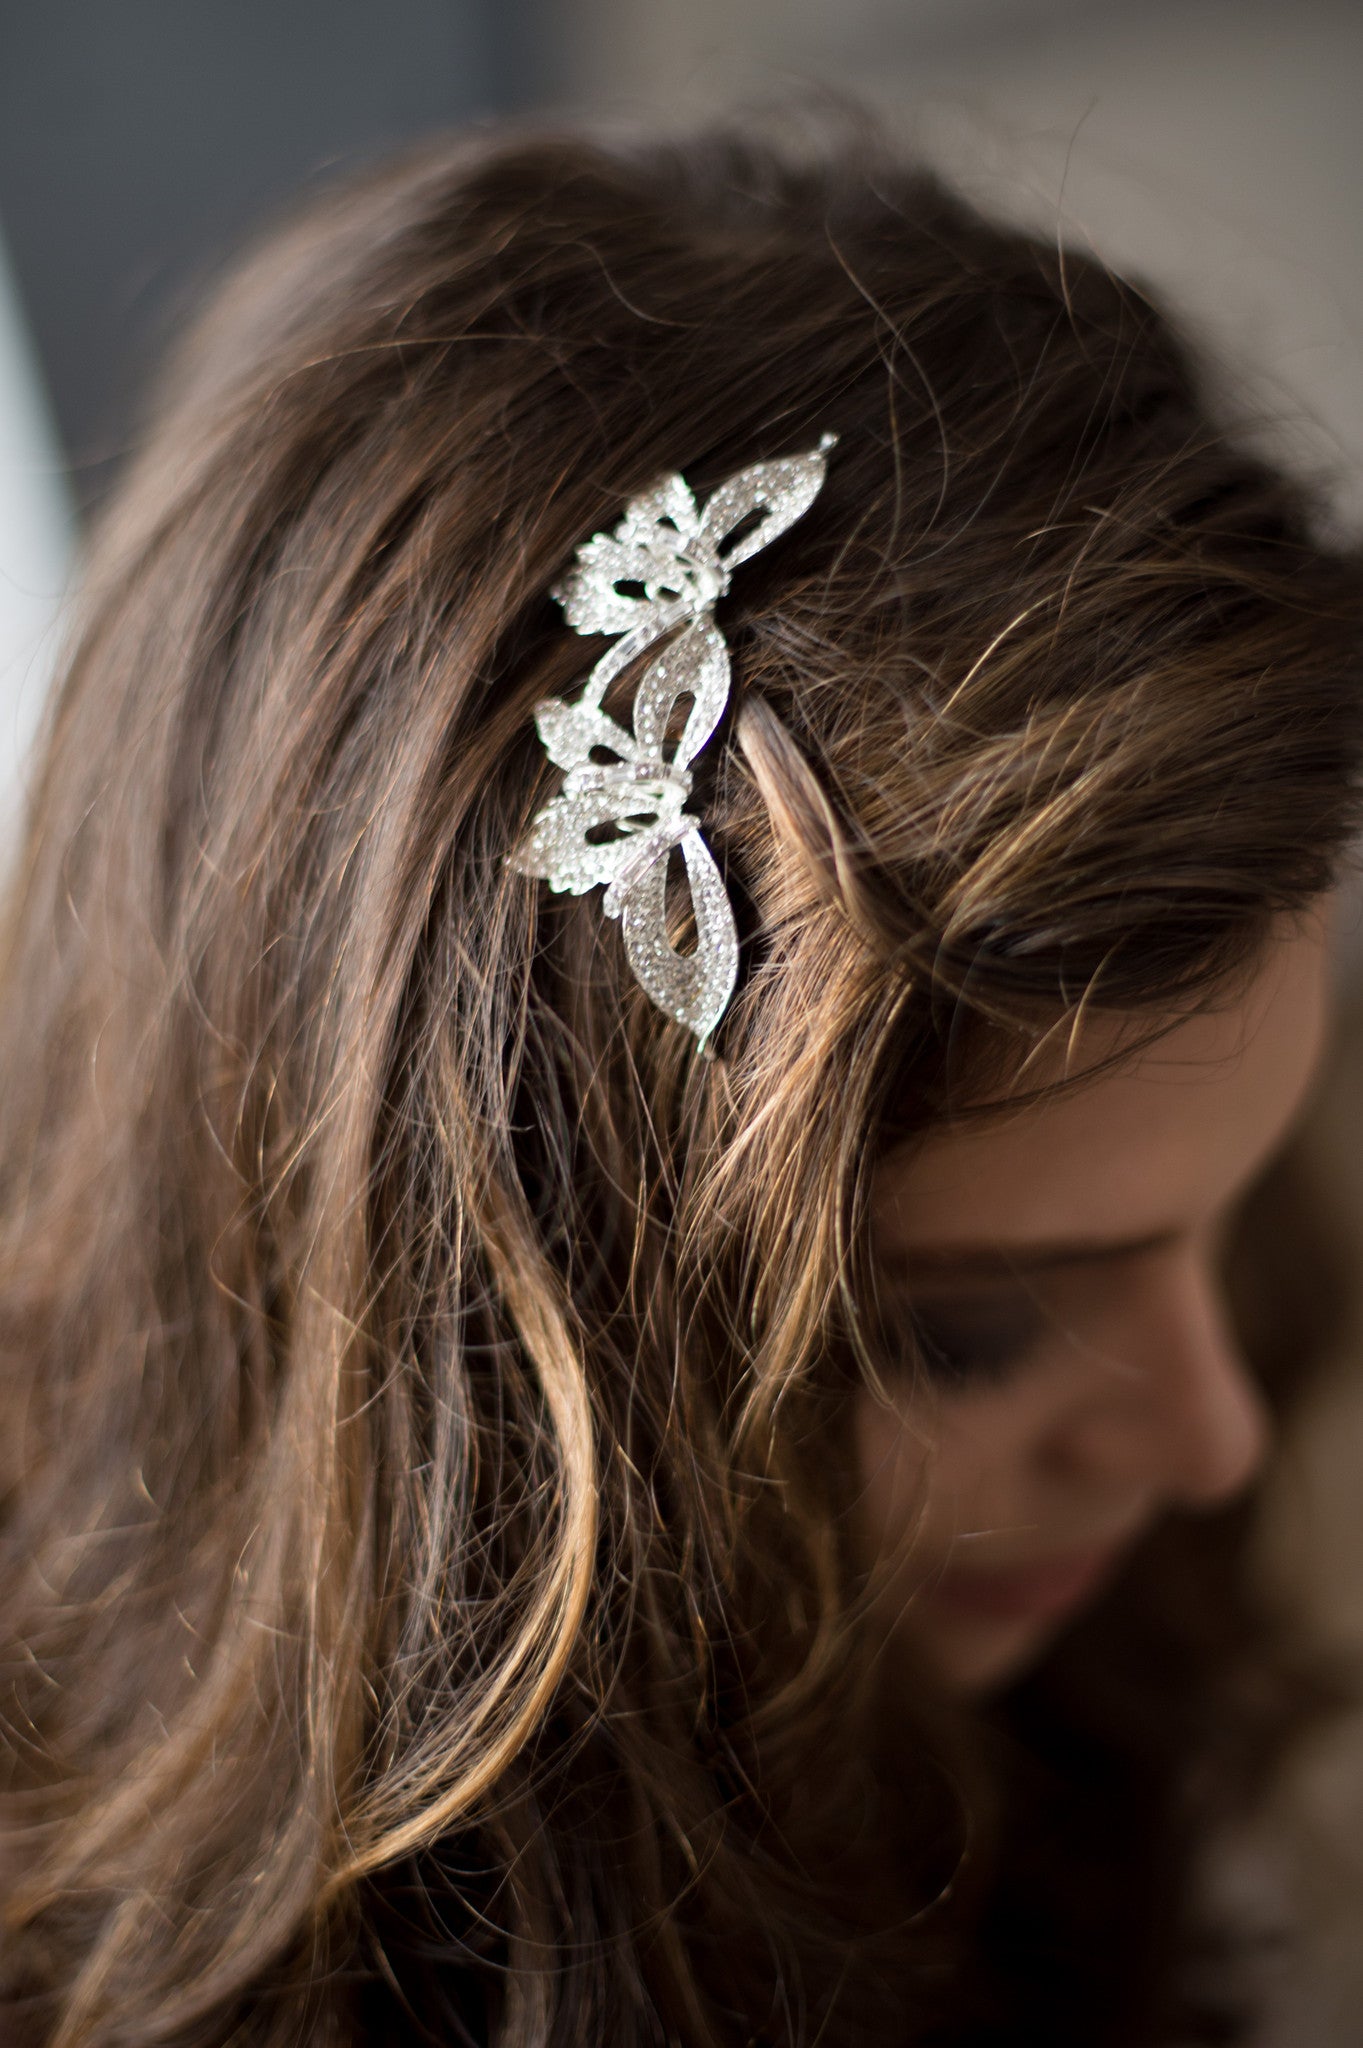 Bridal Accessories and Wedding Jewelry, Camilla Christine, Hair Comb, Headpiece, Iris, Silver, Romantic Orhcid Shaped Pave Crystal Birdal Hair Comb Headpiece